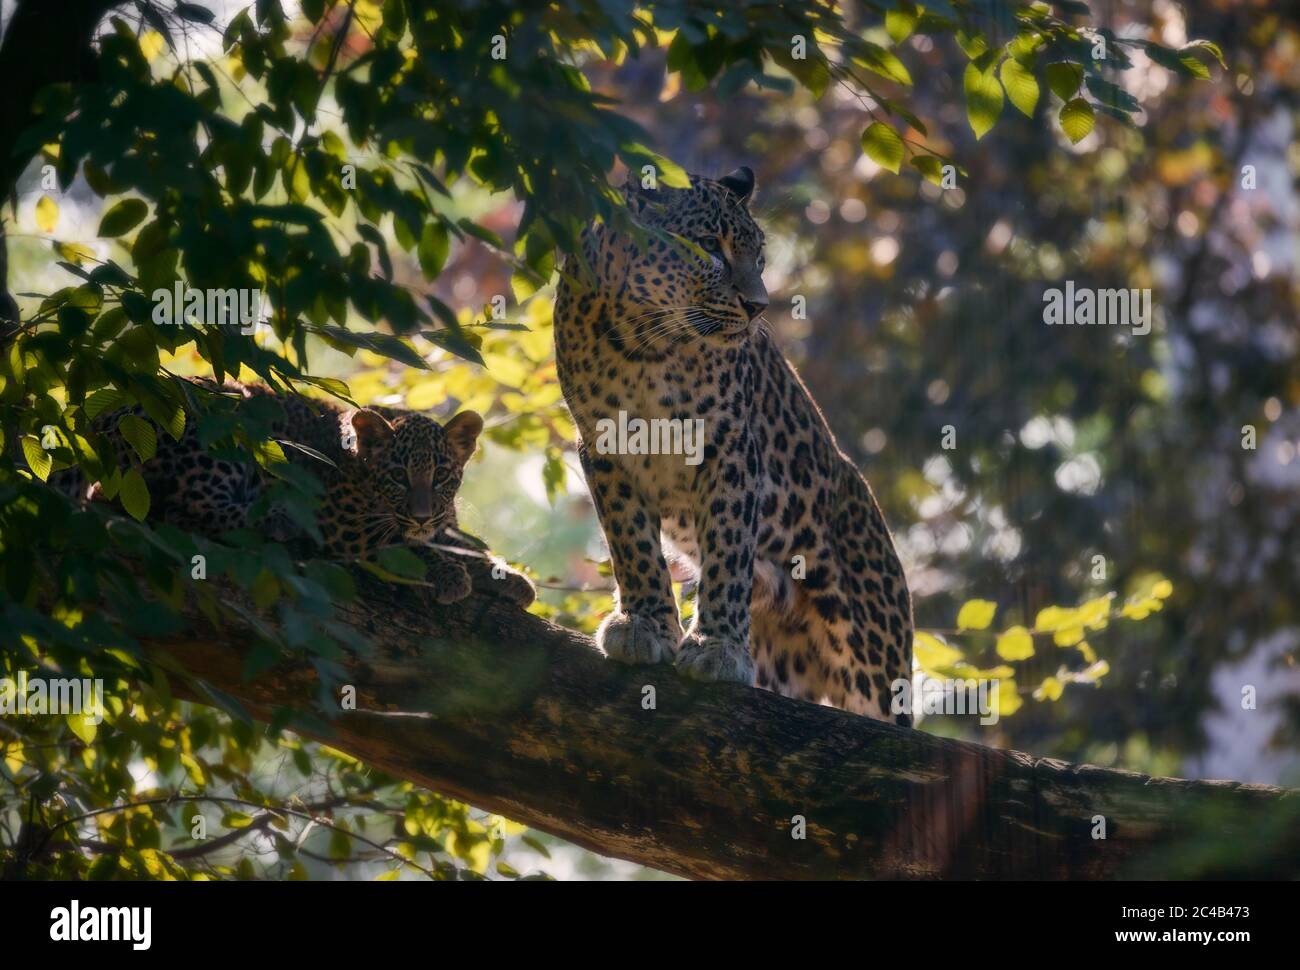 Leopard (Panthera pardus), mother with young sitting in the tree, captive, Occurrence in Africa and Asia Stock Photo